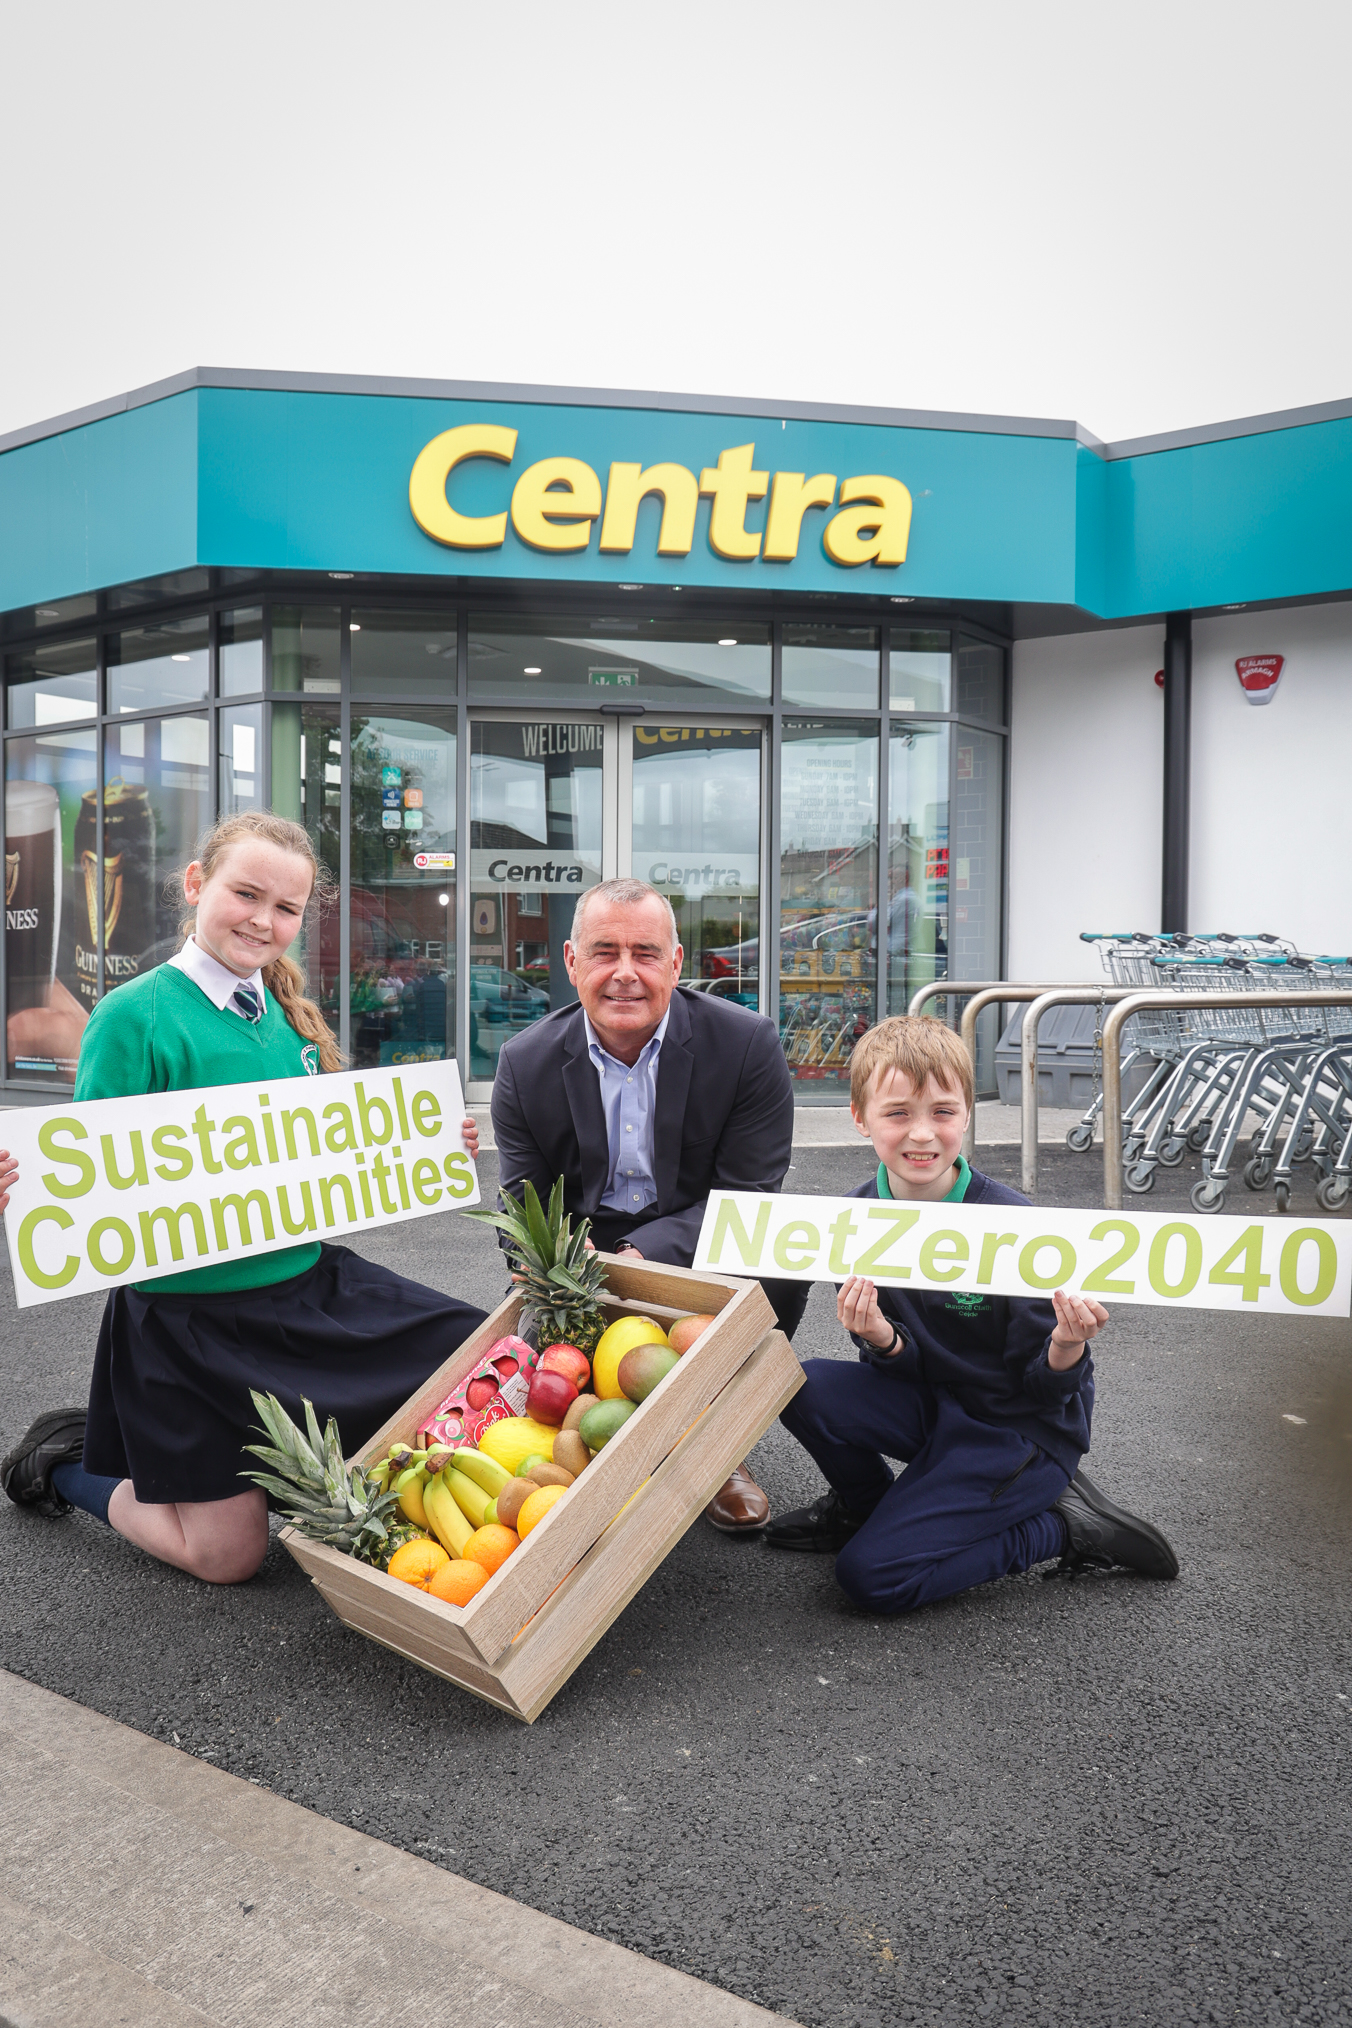 Musgrave NI invests £2.7 million in SuperValu and Centra stores in major new sustainability fund